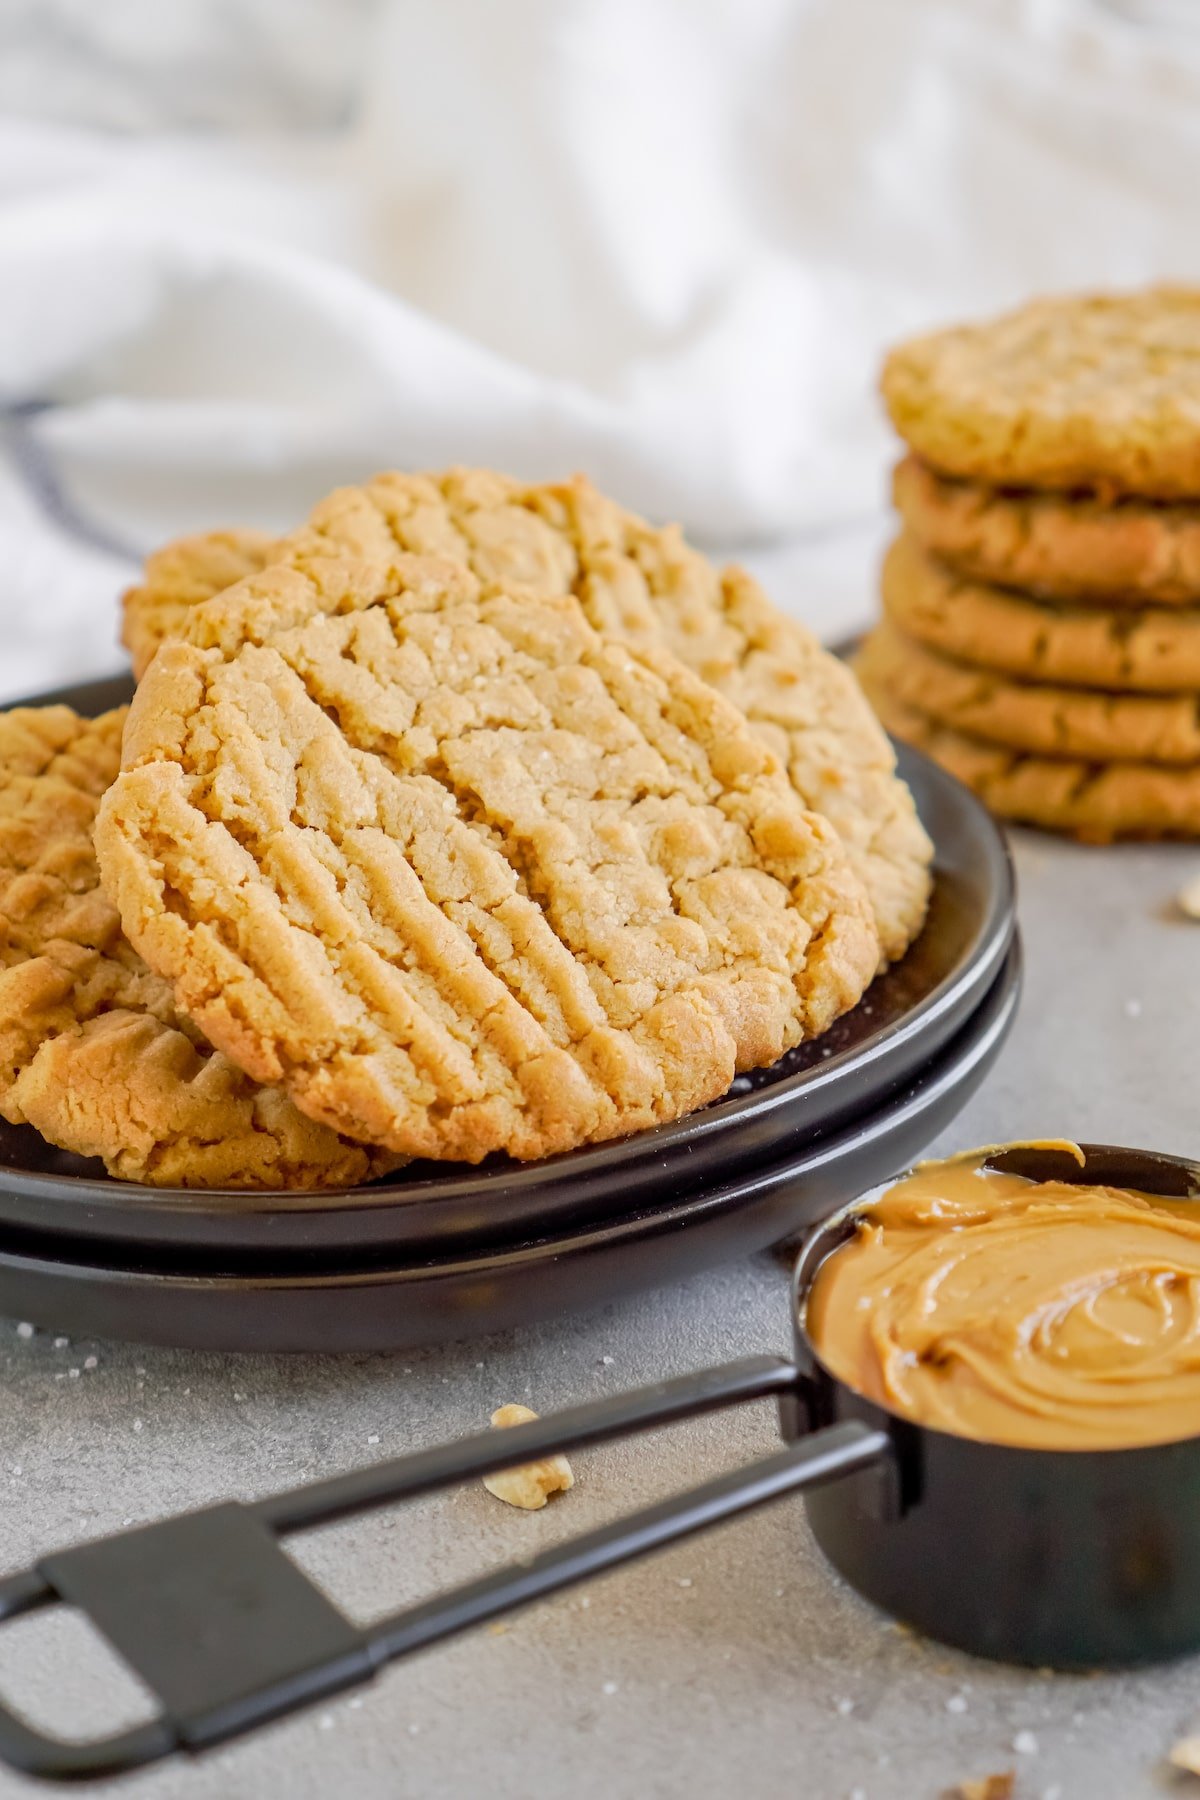 A plate of peanut butter cookies next to a measuring cup full of peanut butter.